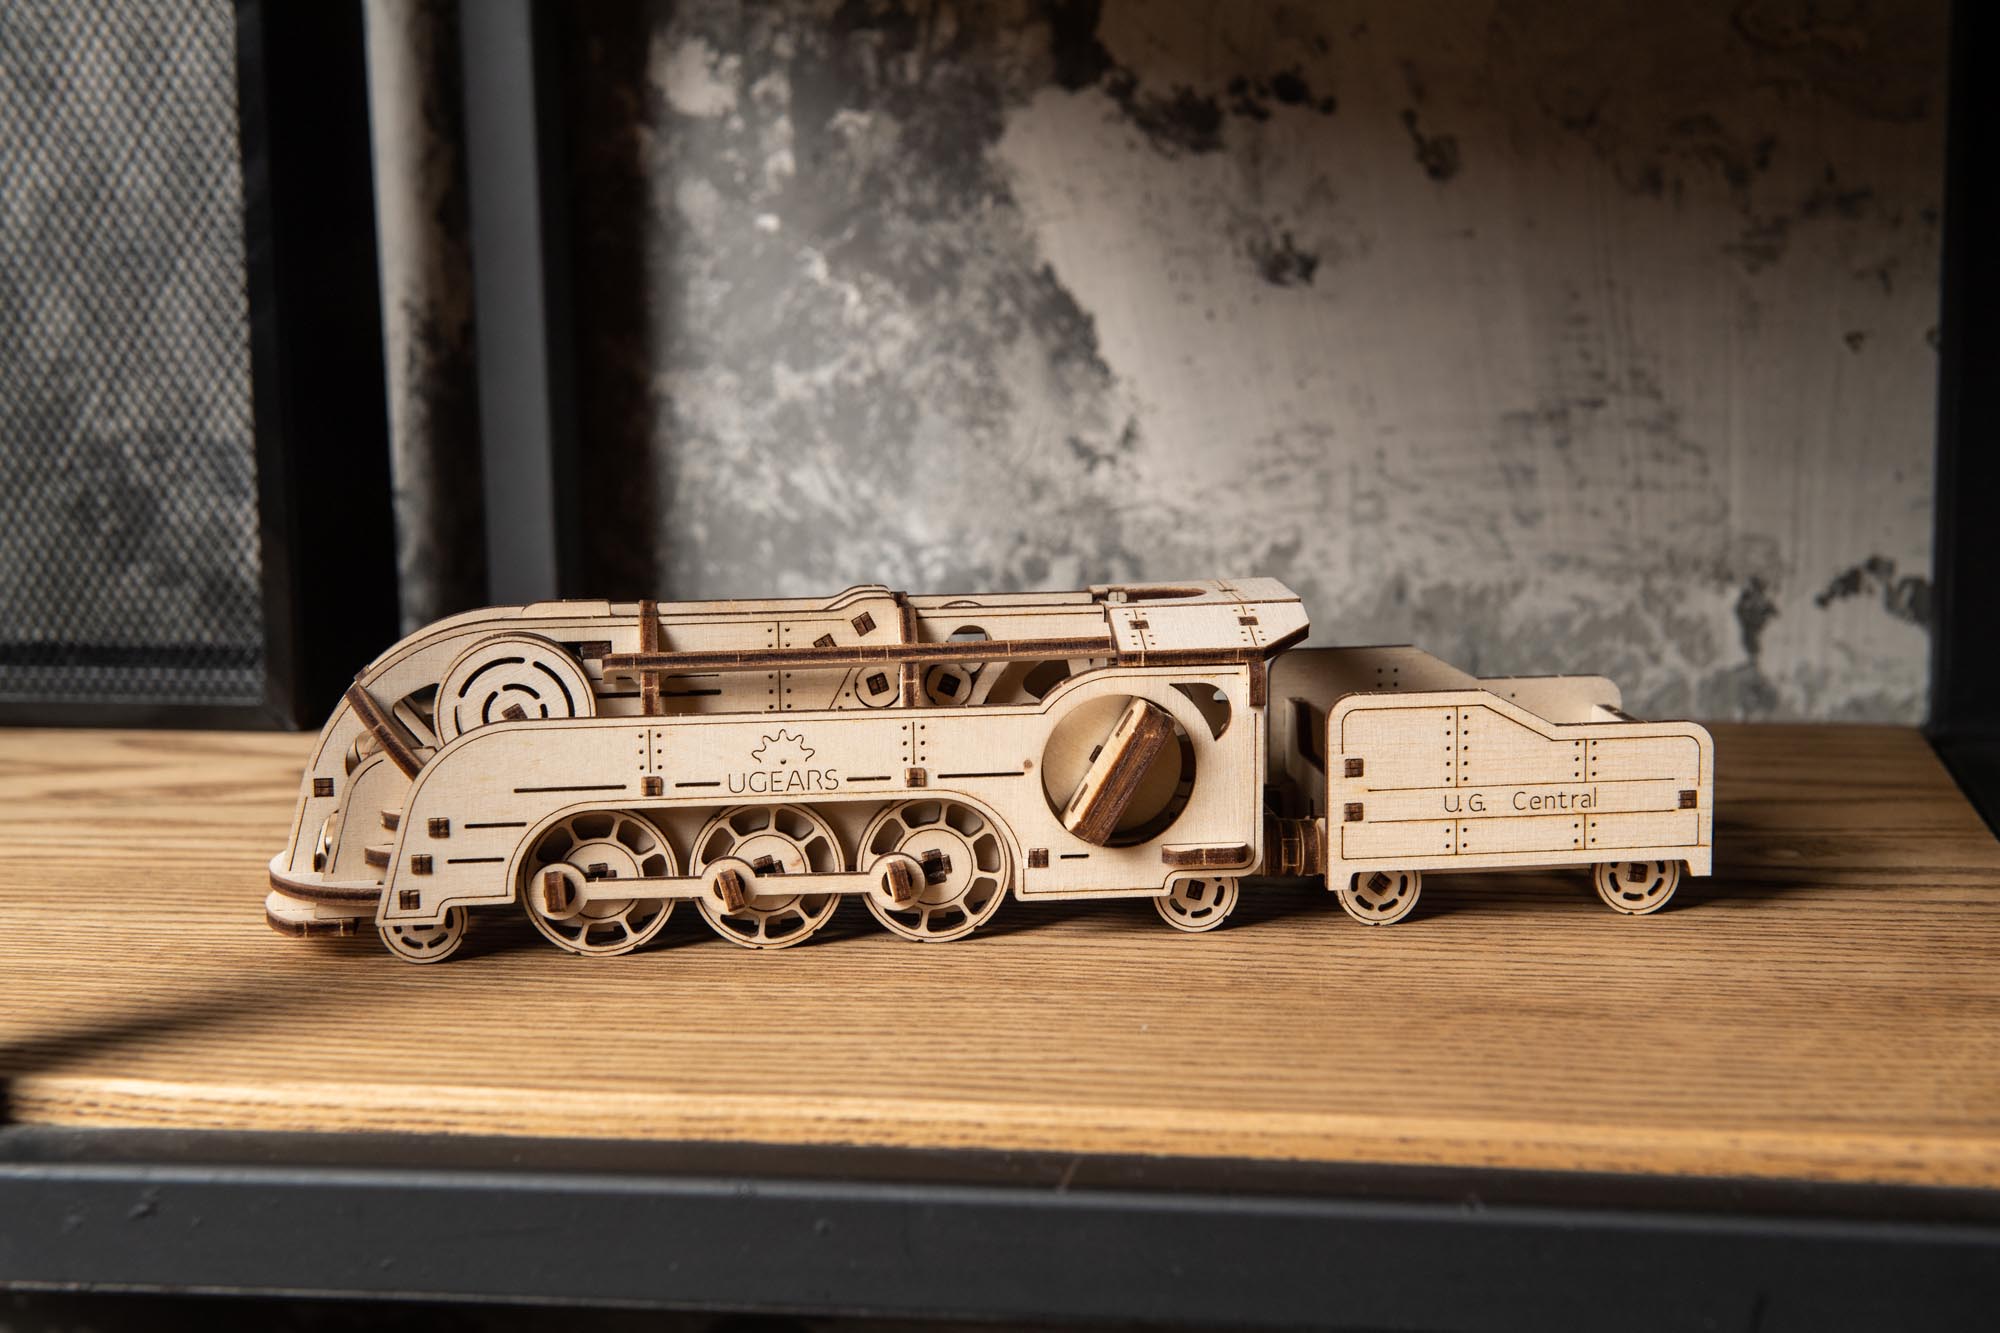 Ugears Mechanical Model  V-Express Steam Train with Tender wooden  construction kit